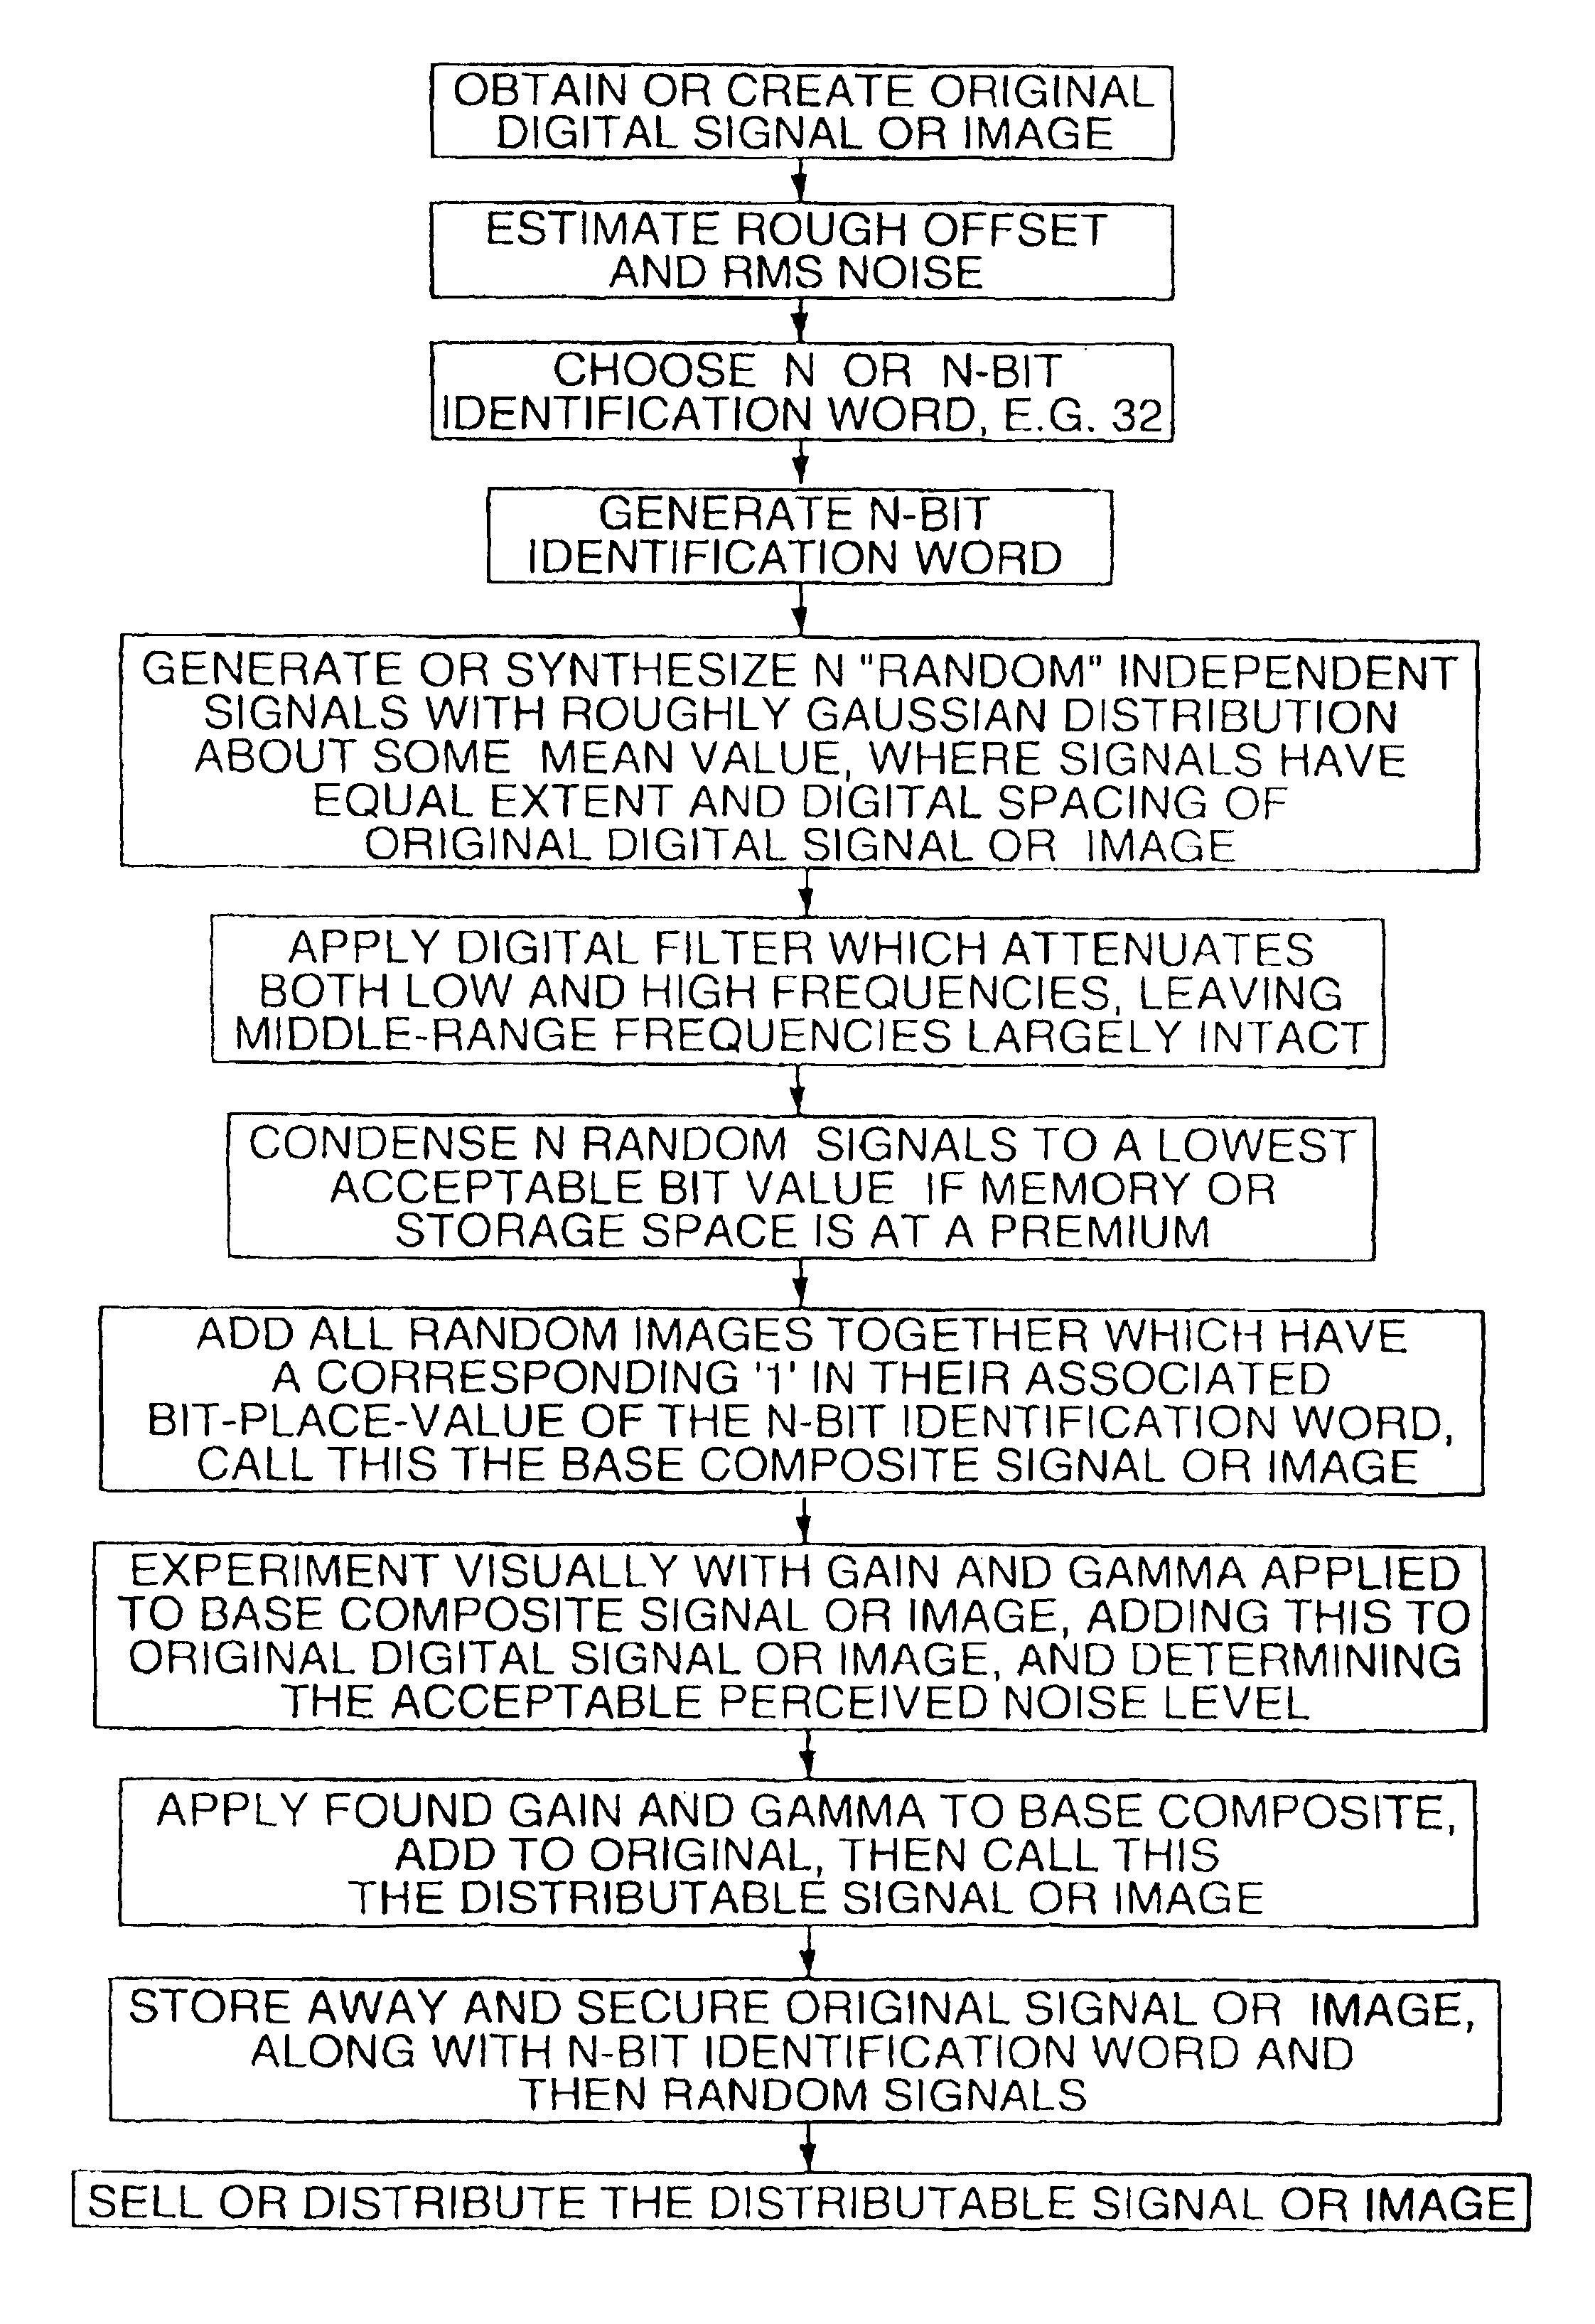 Methods for surveying dissemination of proprietary empirical data